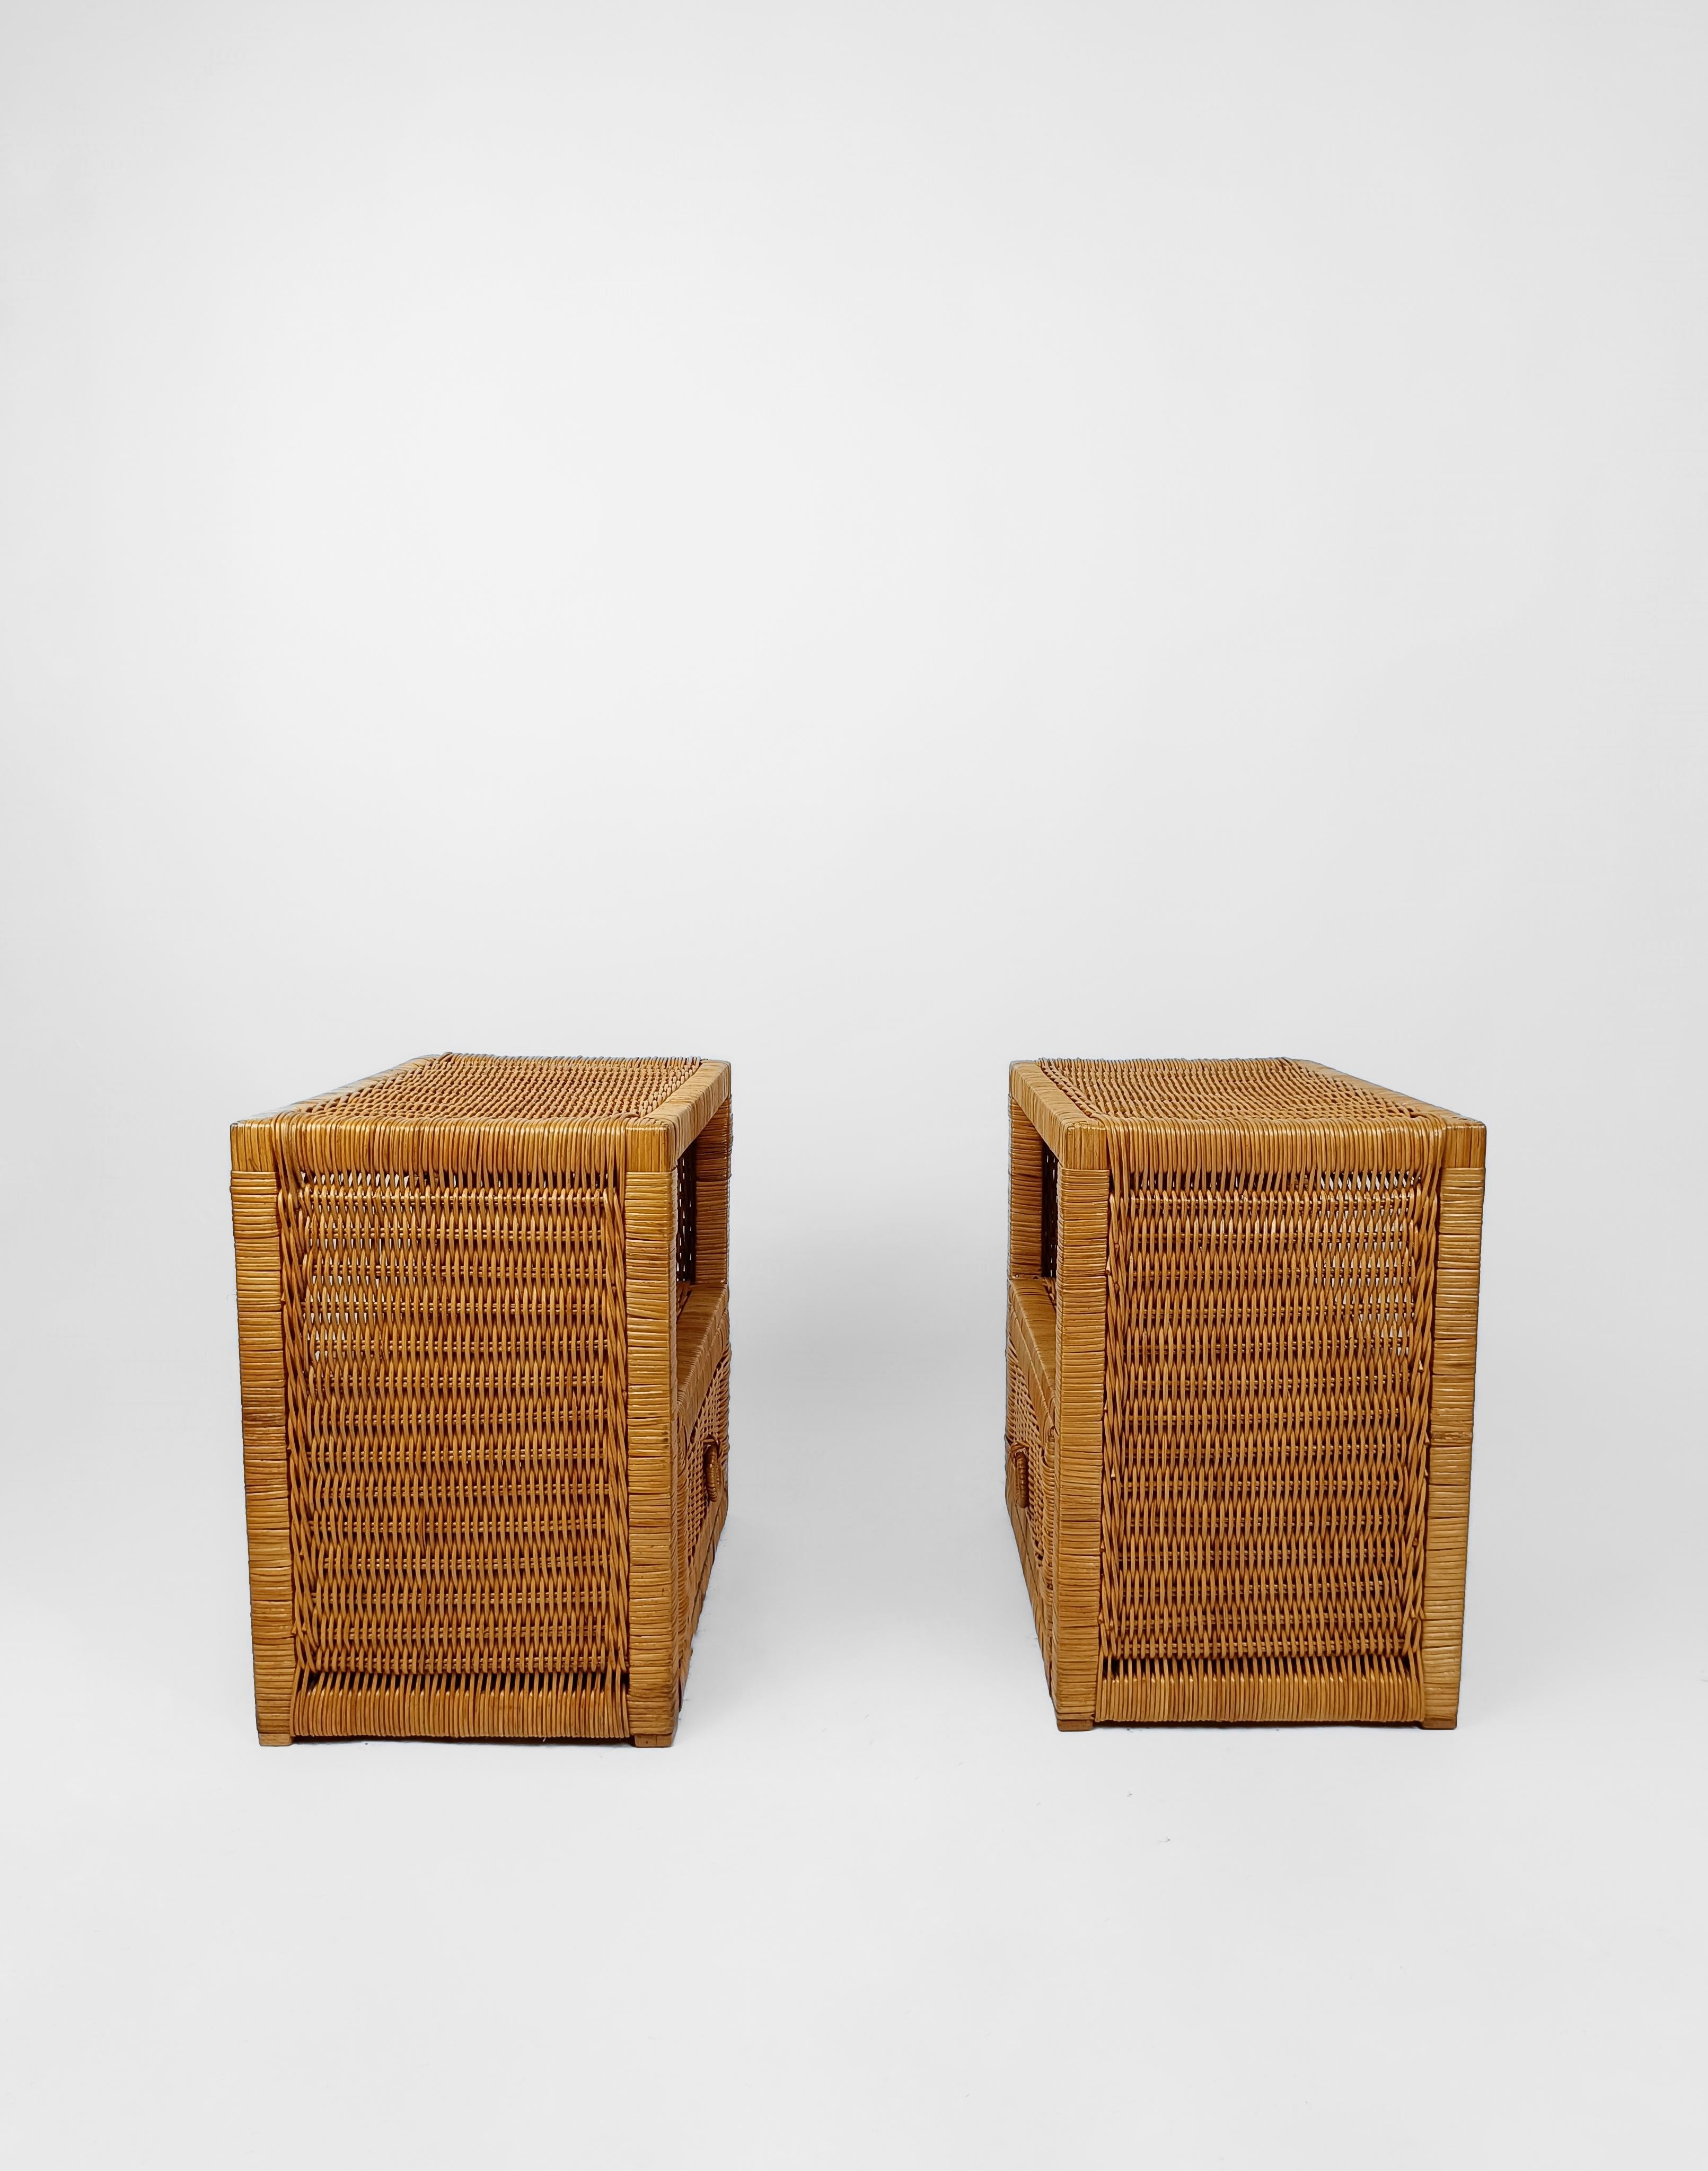 Pair of Woven Rattan and Wicker Nightstands / Bedside Tables, Italy 1970s 4